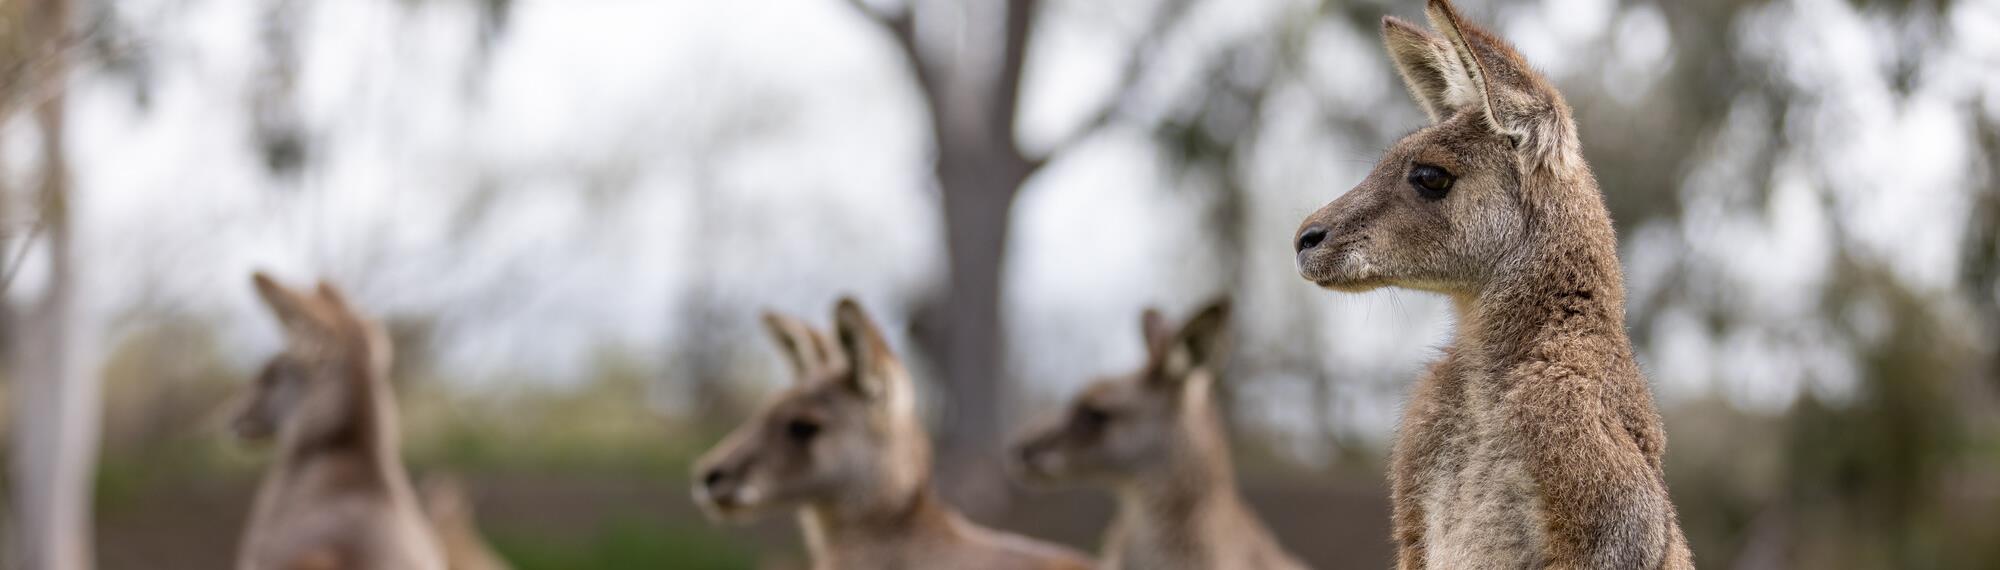 Four Kangaroos, with one in focus, looking toward the left of frame.